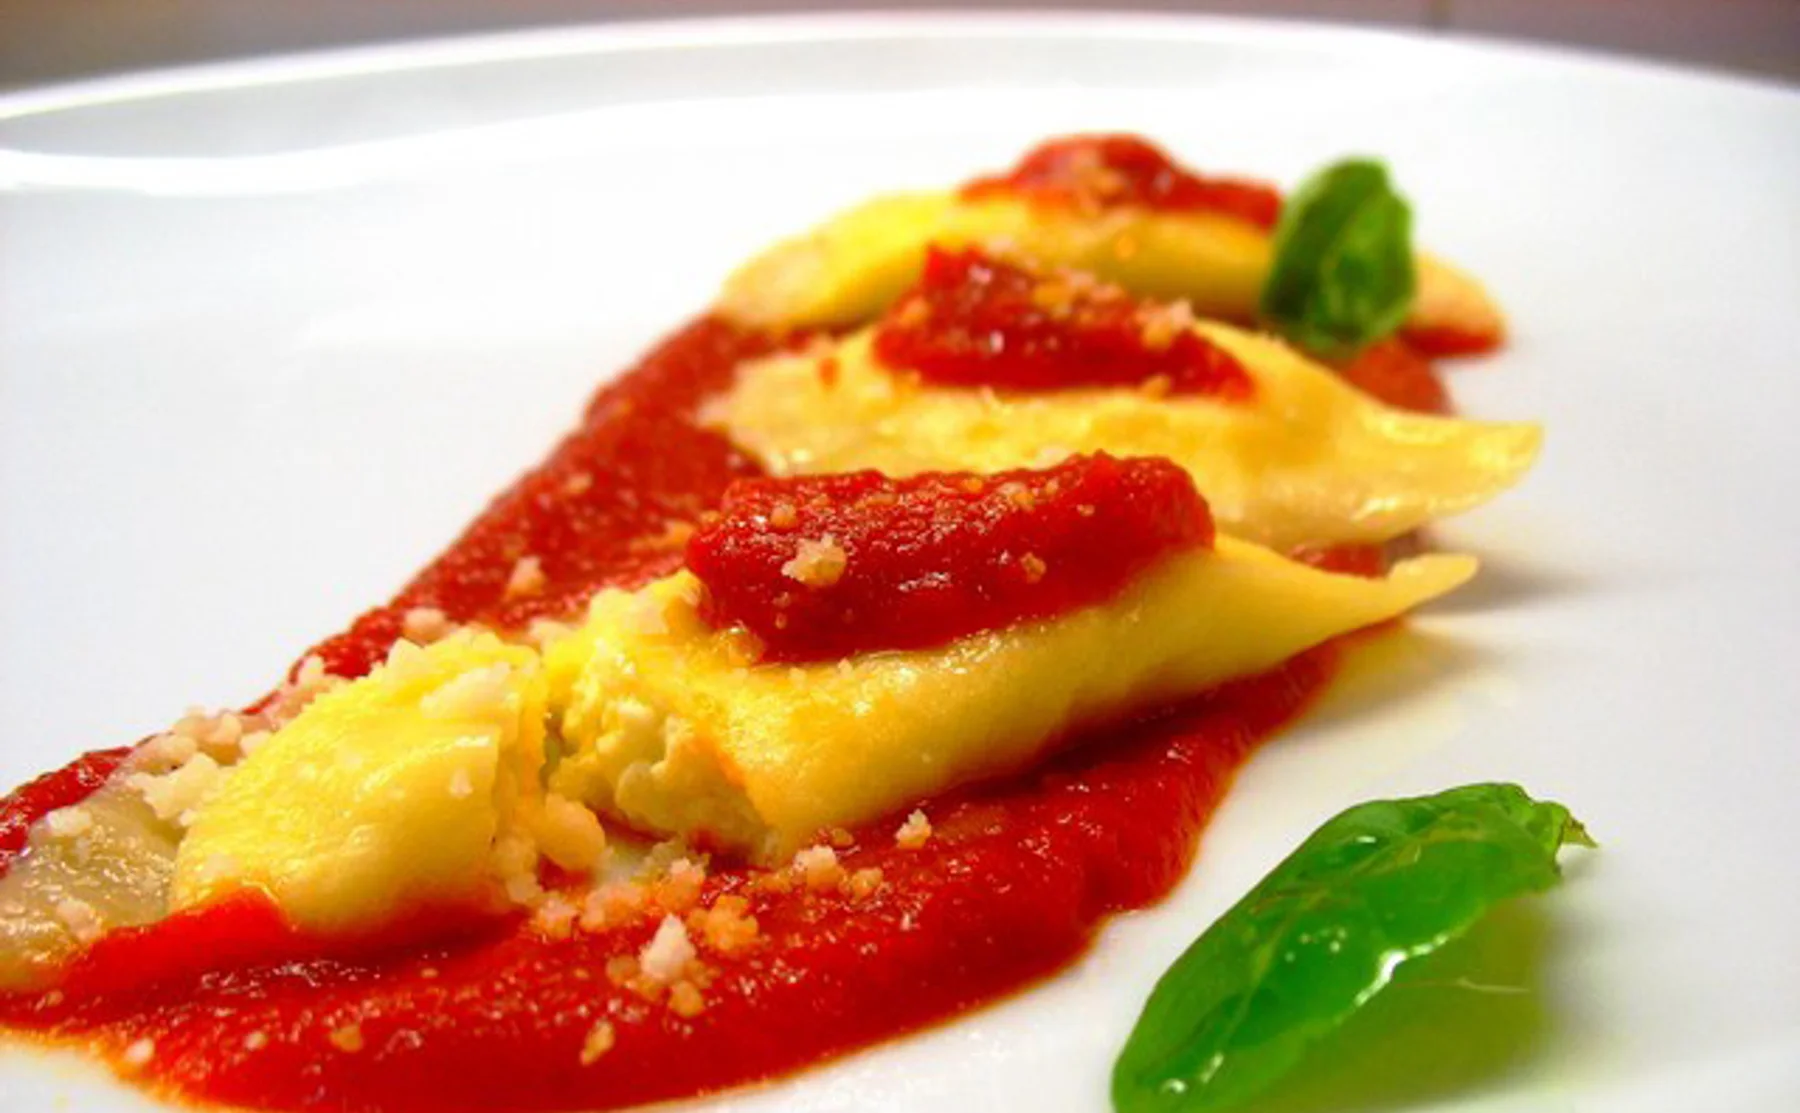 The Terrace at the Park - Homemade Ravioli - 376941